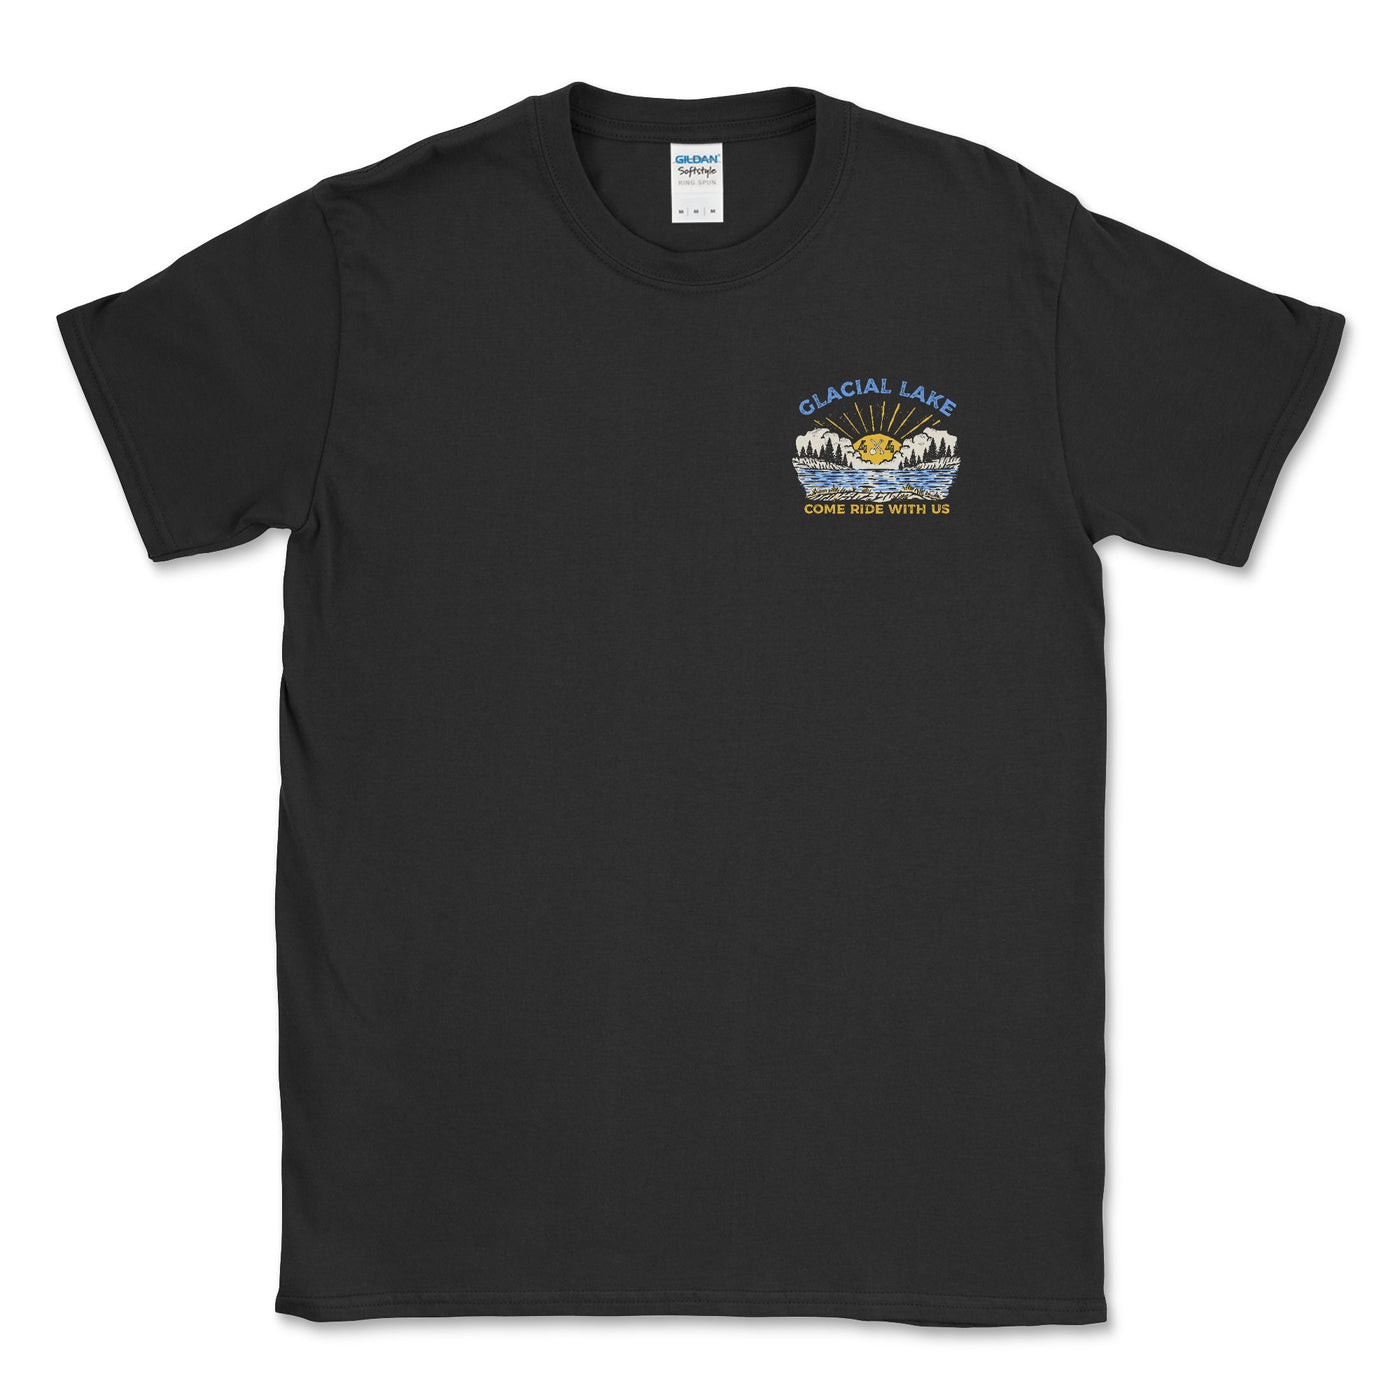 Glacial Lake 4 x 4 Youth Tee - Goats Trail Off-Road Apparel Company